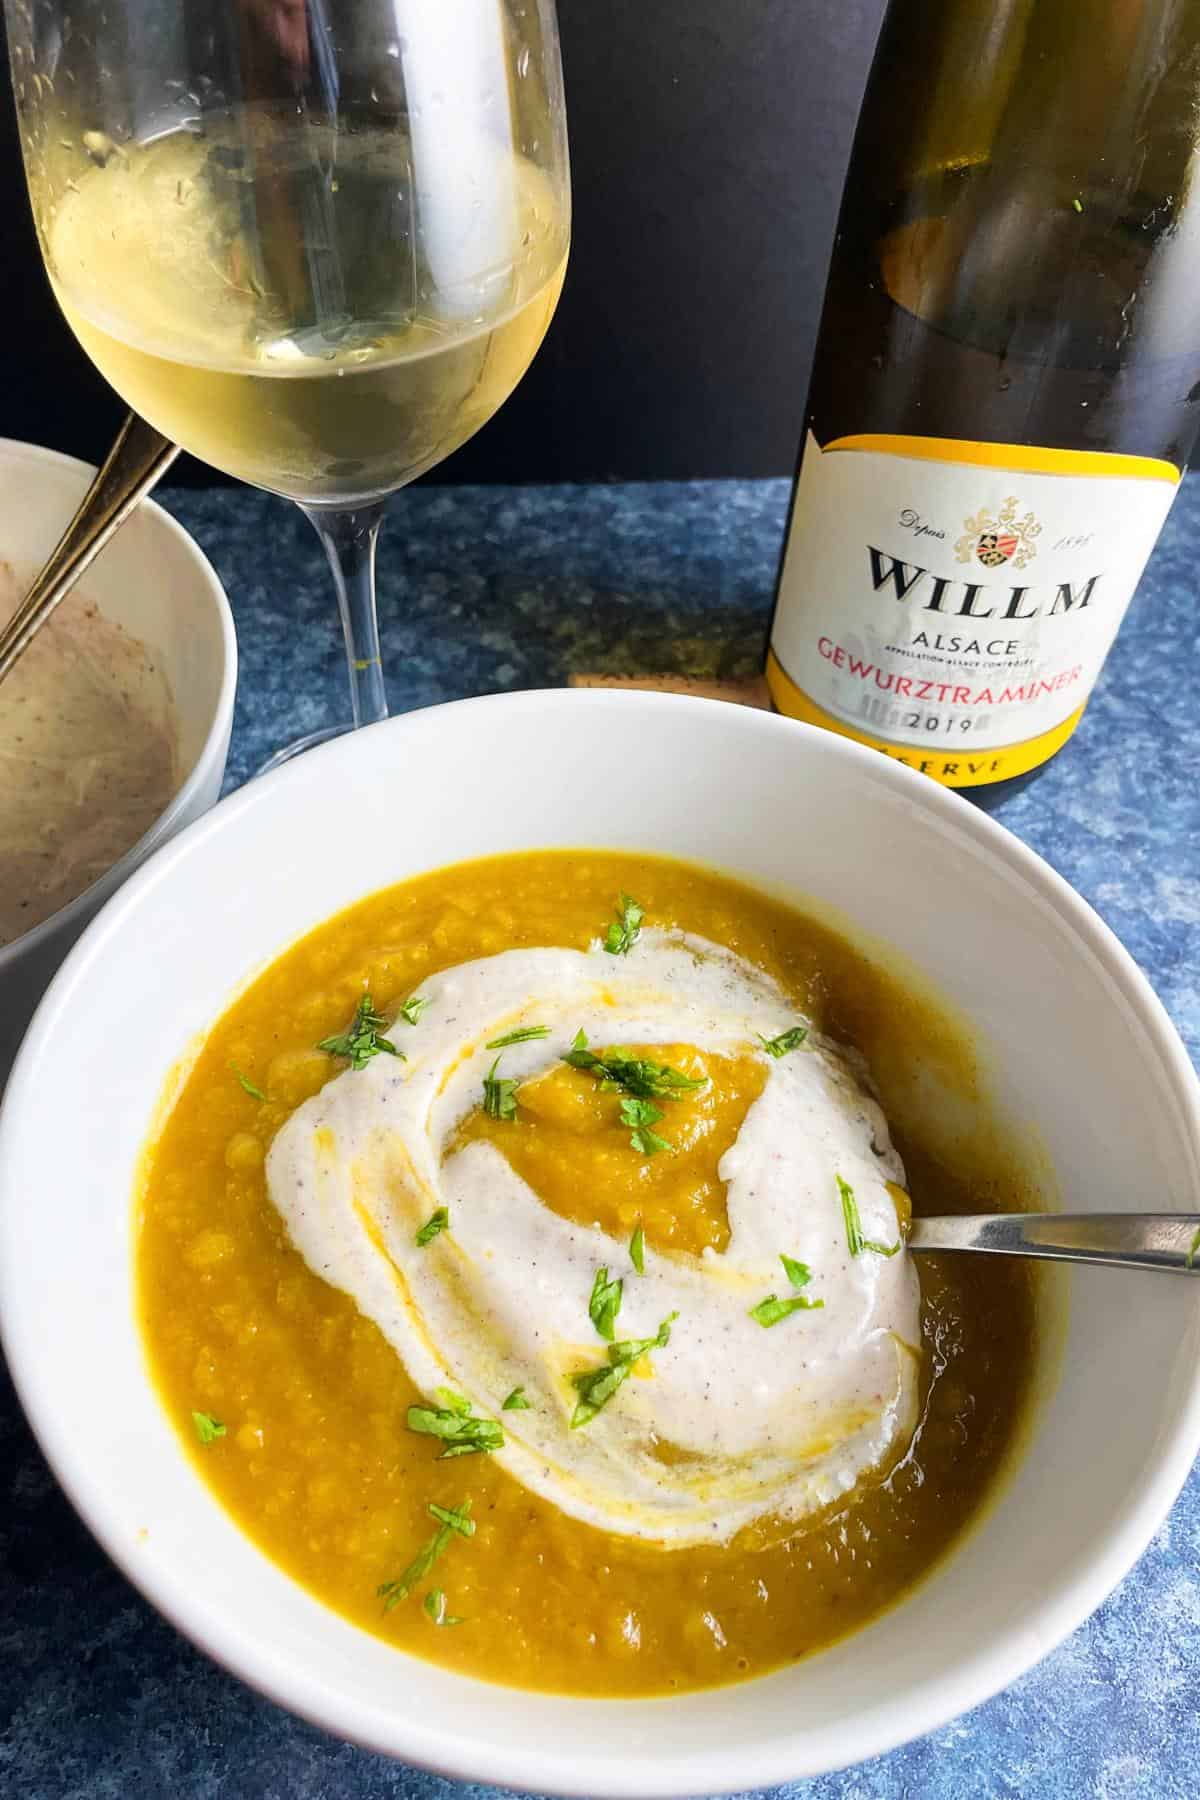 curried acorn squash soup with a swirl of yogurt on top, served with a bottle of gewurztraminer wine.